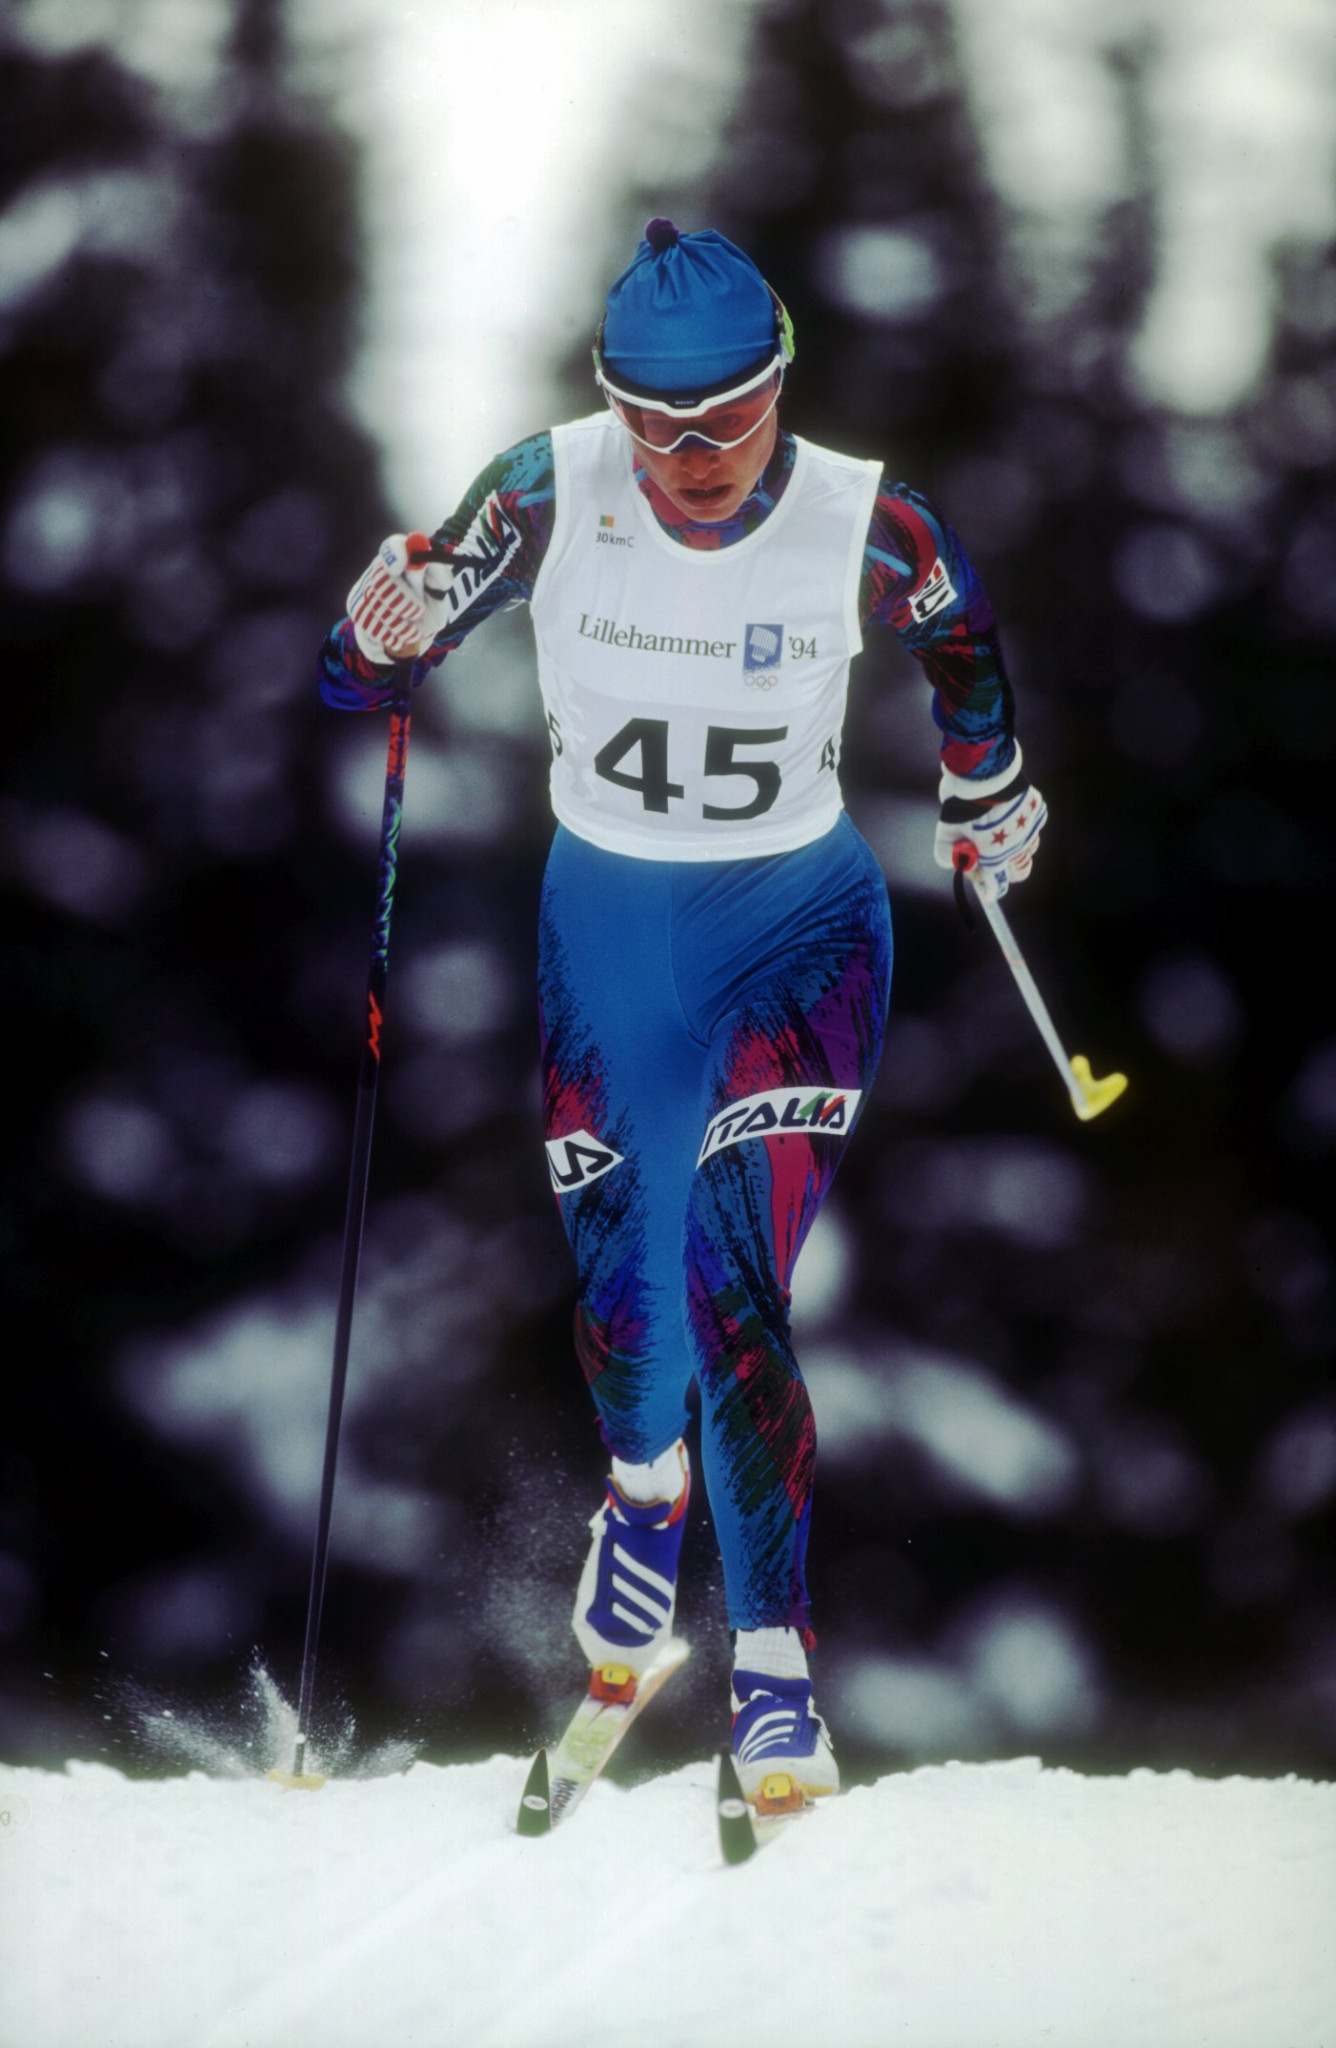 Manuela Di Centa won two gold medals at the 1994 Winter Olympic Games in Lillehammer ©Getty Images/Clive Brunskill/ALLSPORT